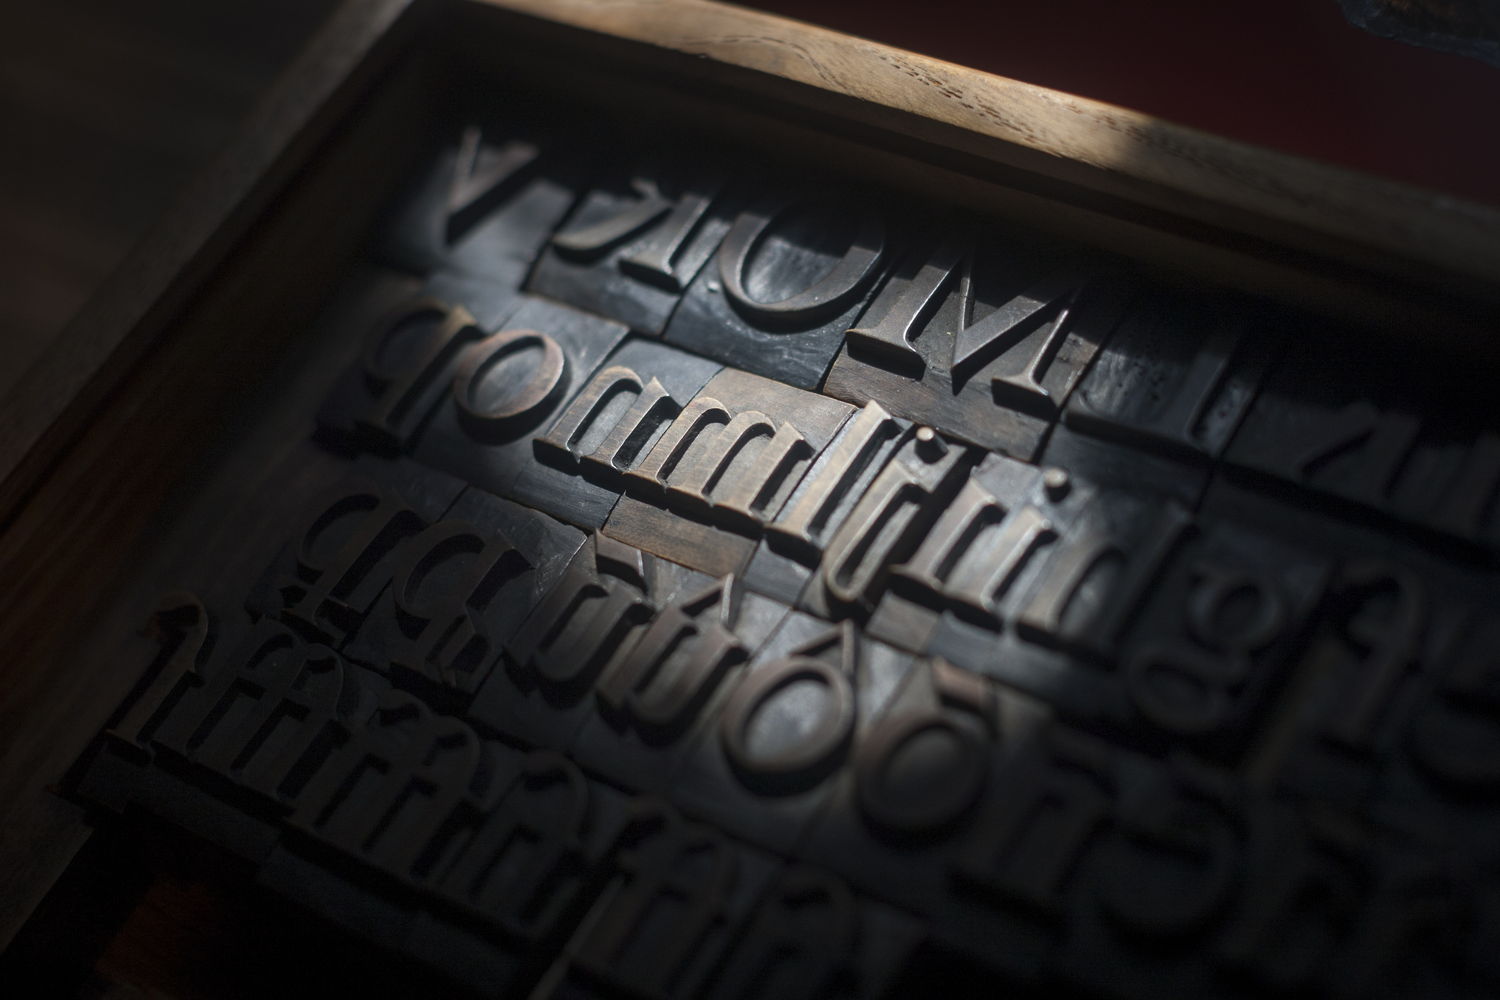 Museum Plantin-Moretus, typography collection, photo: Ans Brys